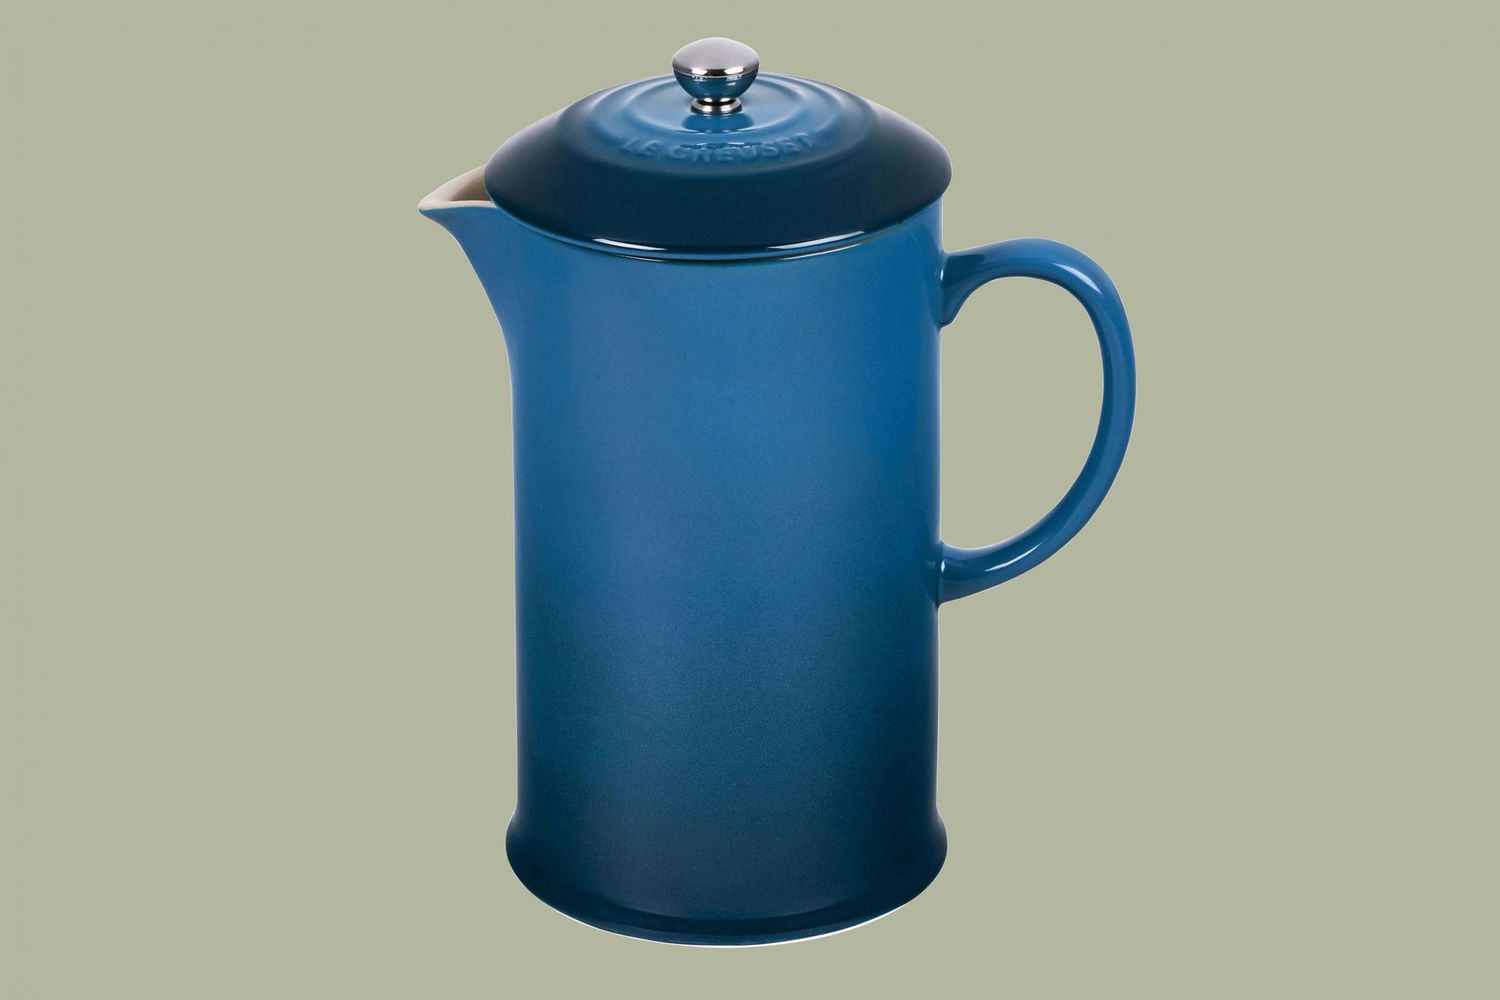 Le Creuset French Press in Deep Teal,